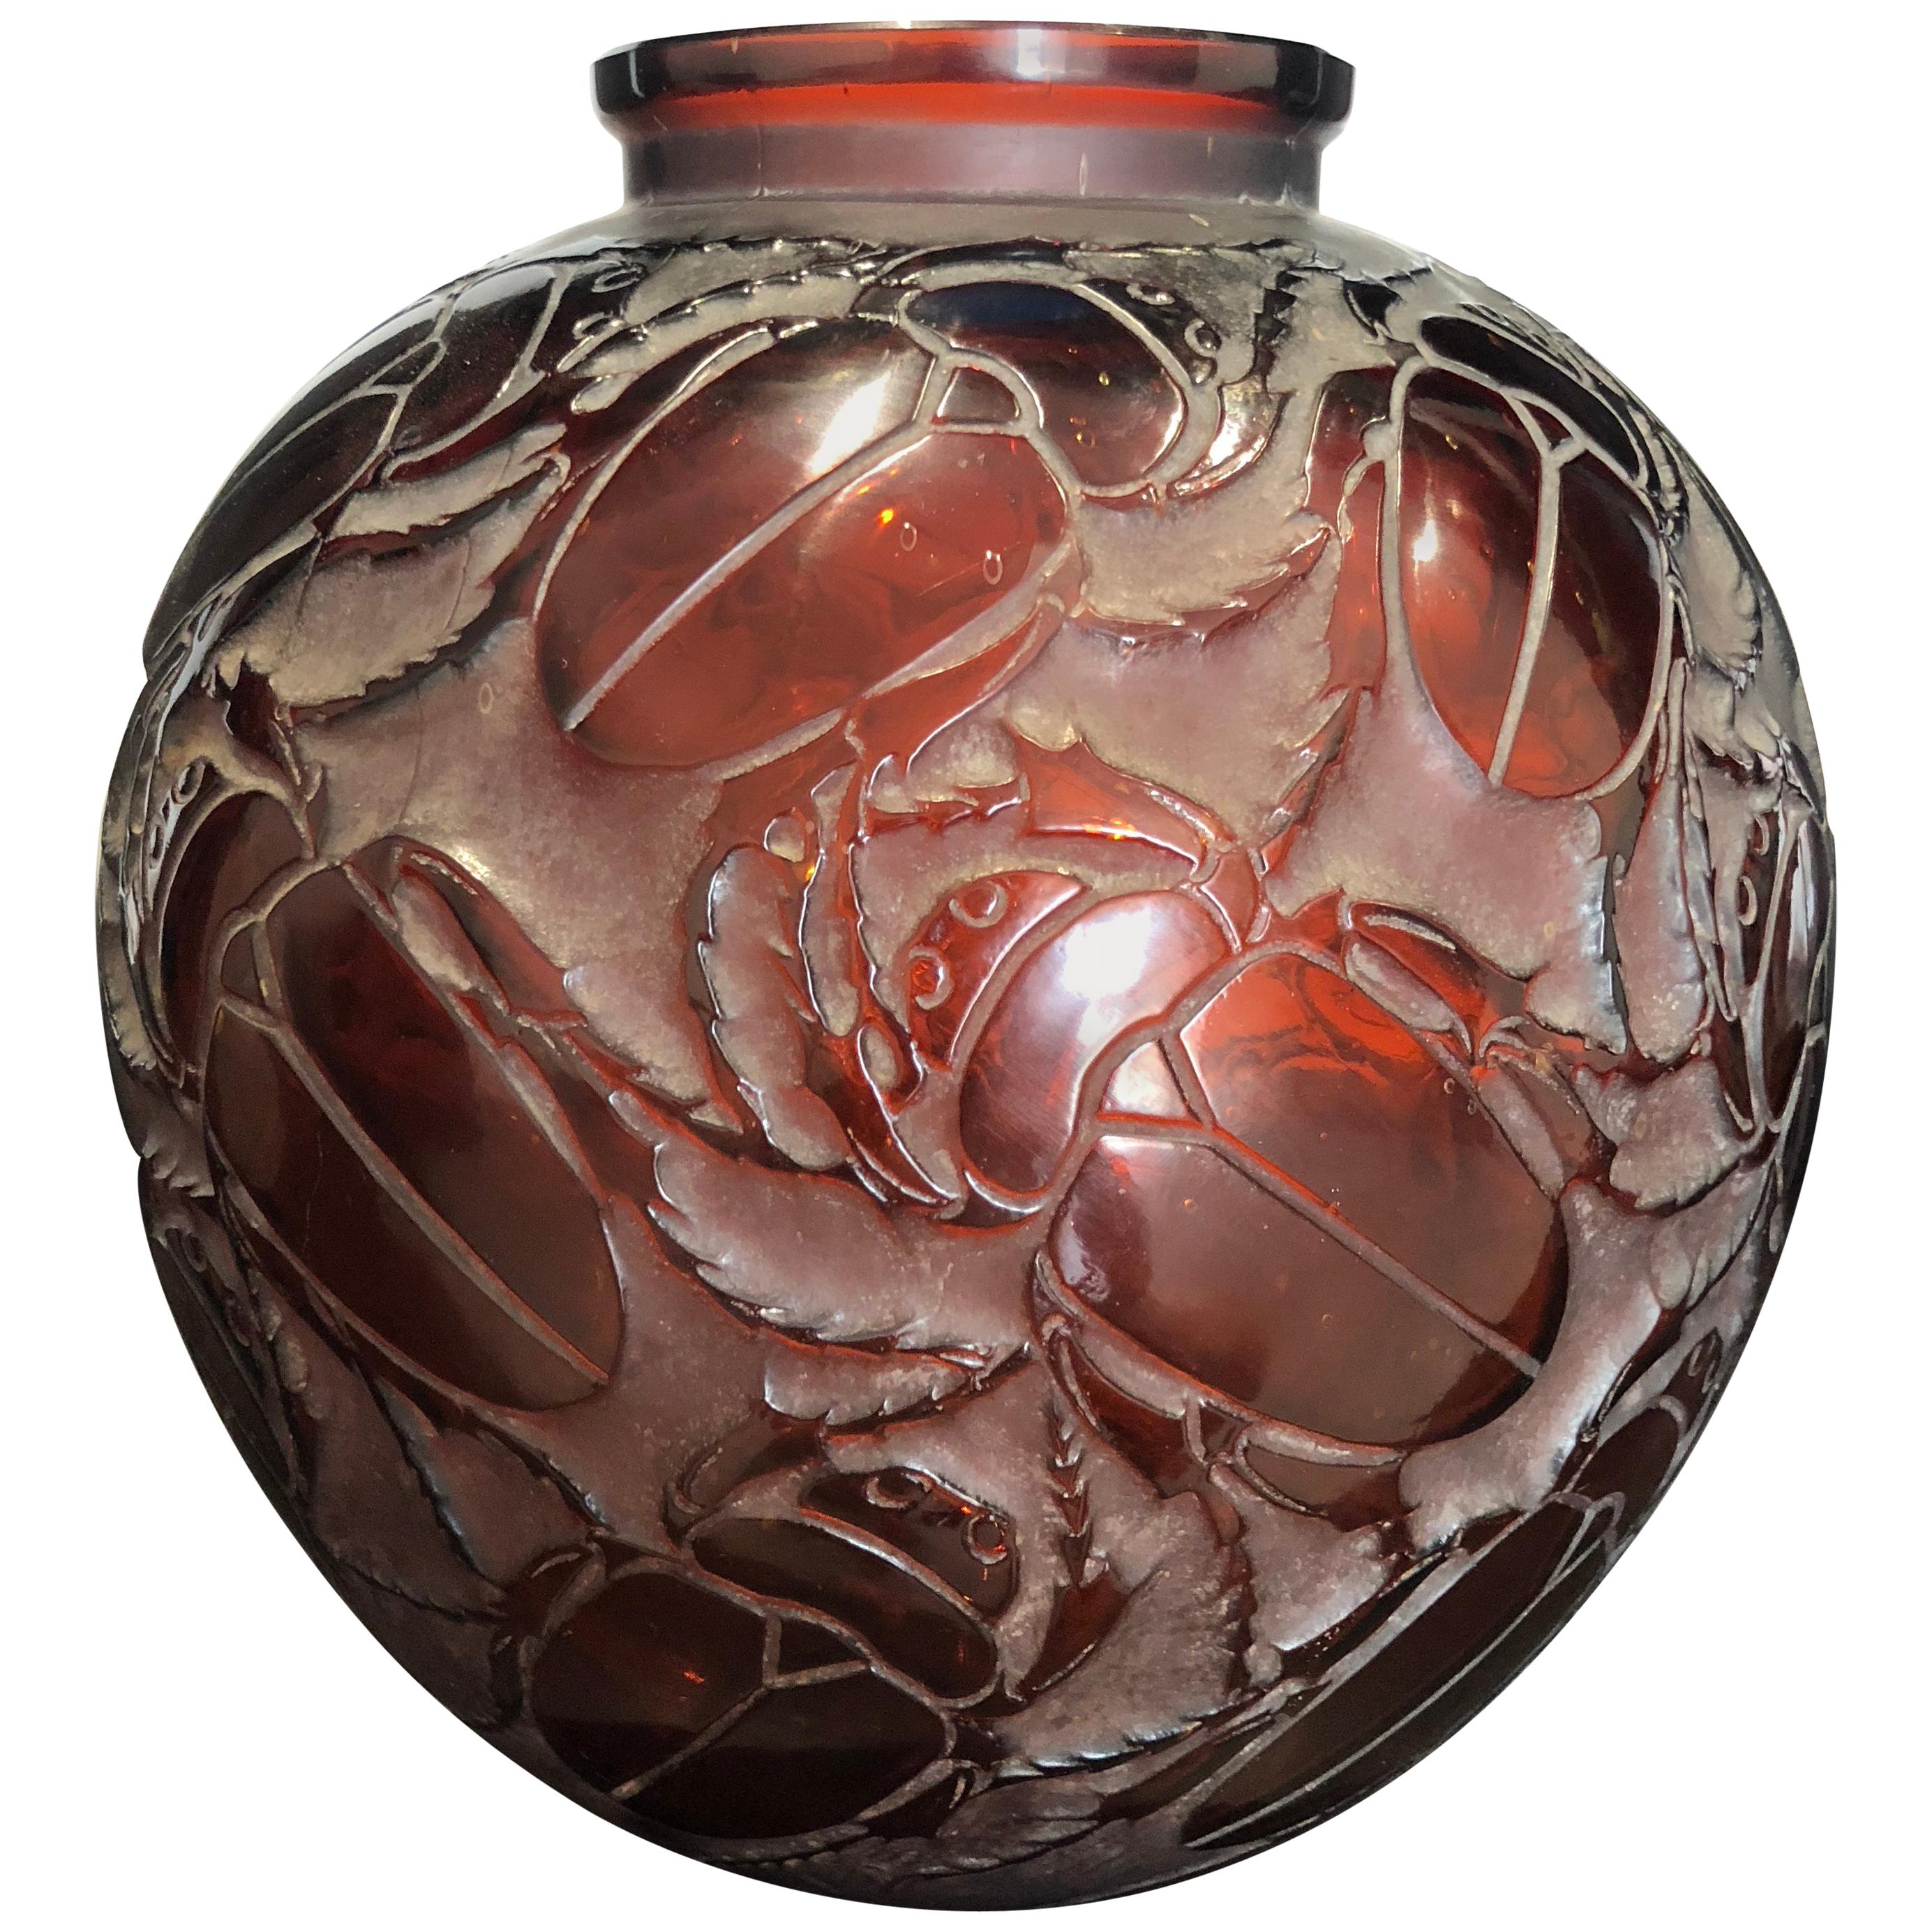 1923 Rene Lalique Gros Scarabees Vase Red Amber Glass, Beetles